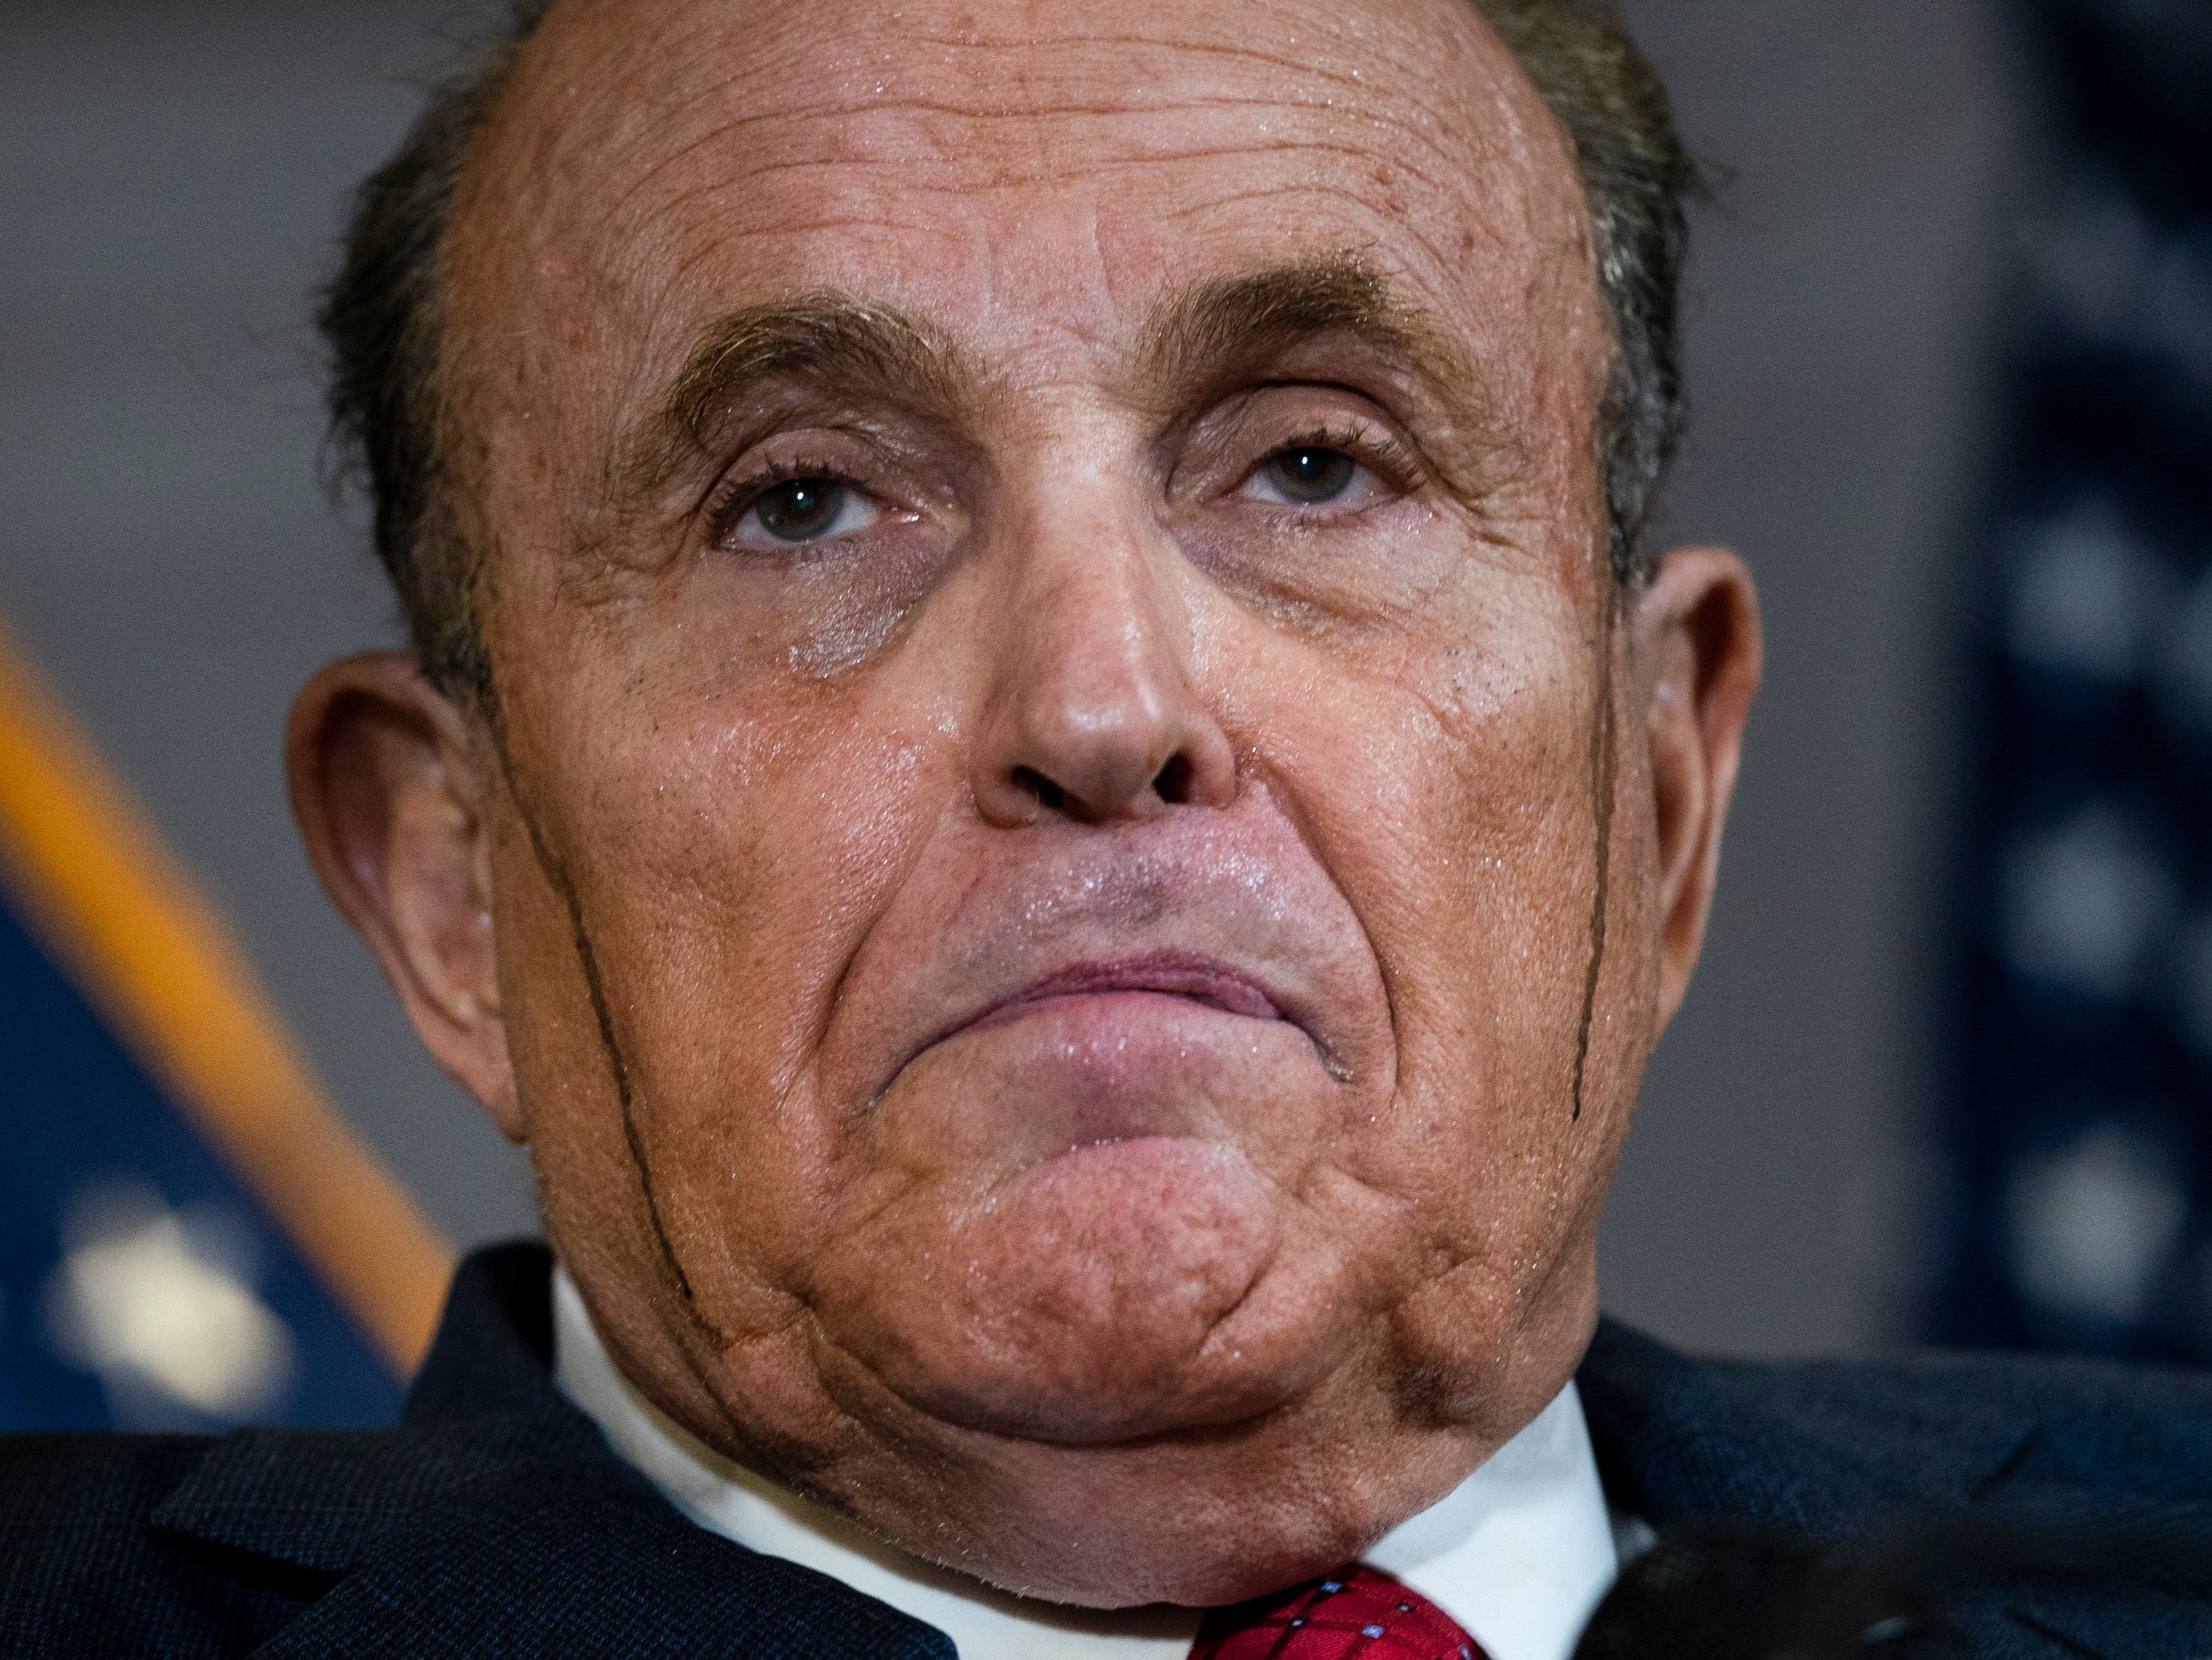 Rudy Giuliani, pictured here in November 2020, served as one of Trump’s most prominent aides